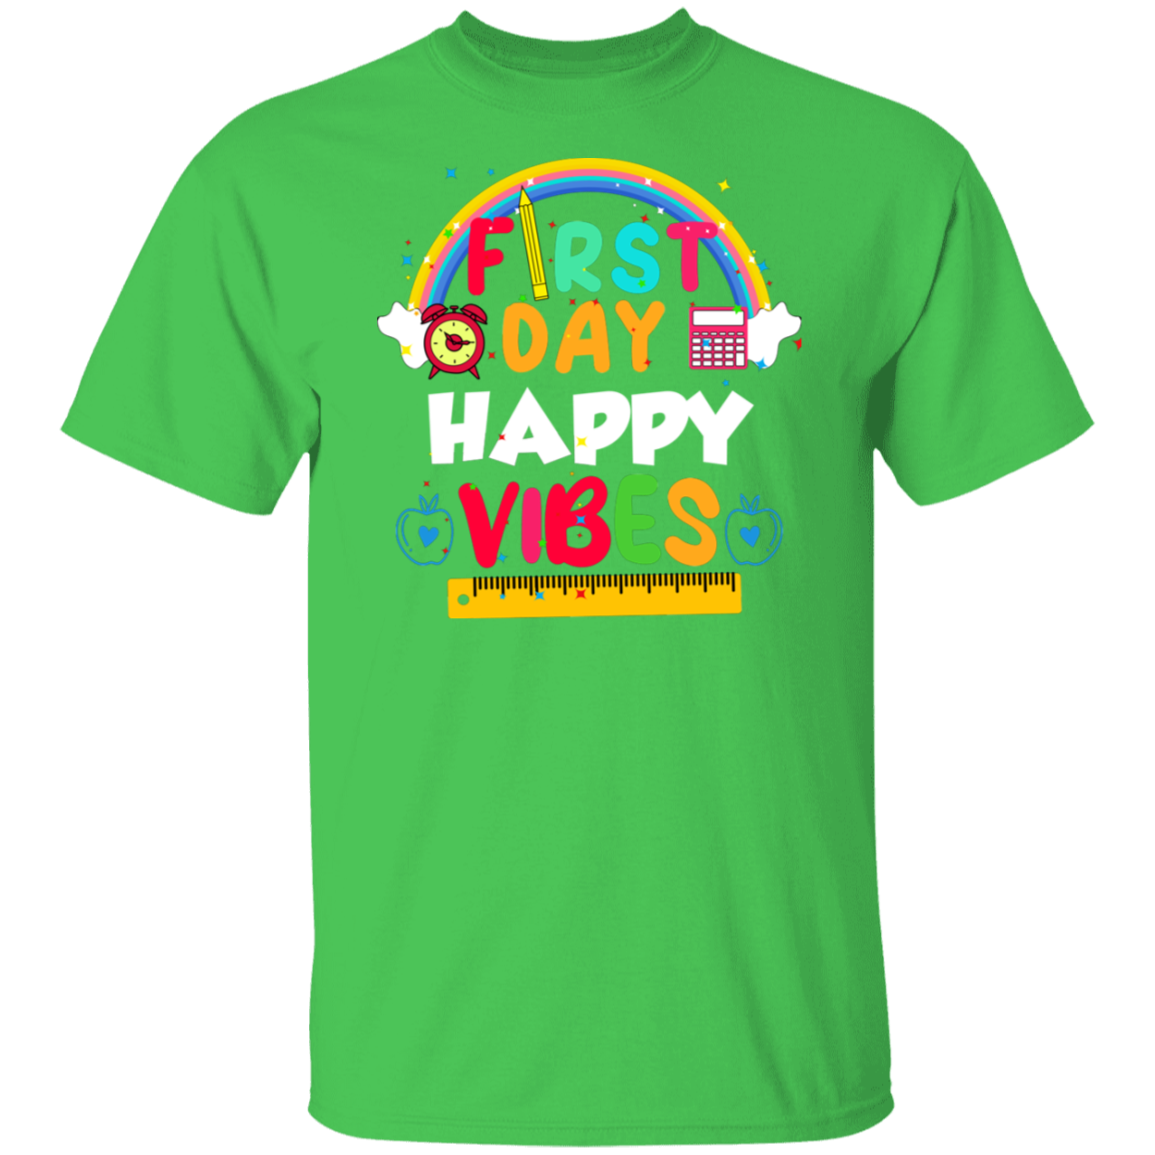 First Day Happy Vibes T-shirt